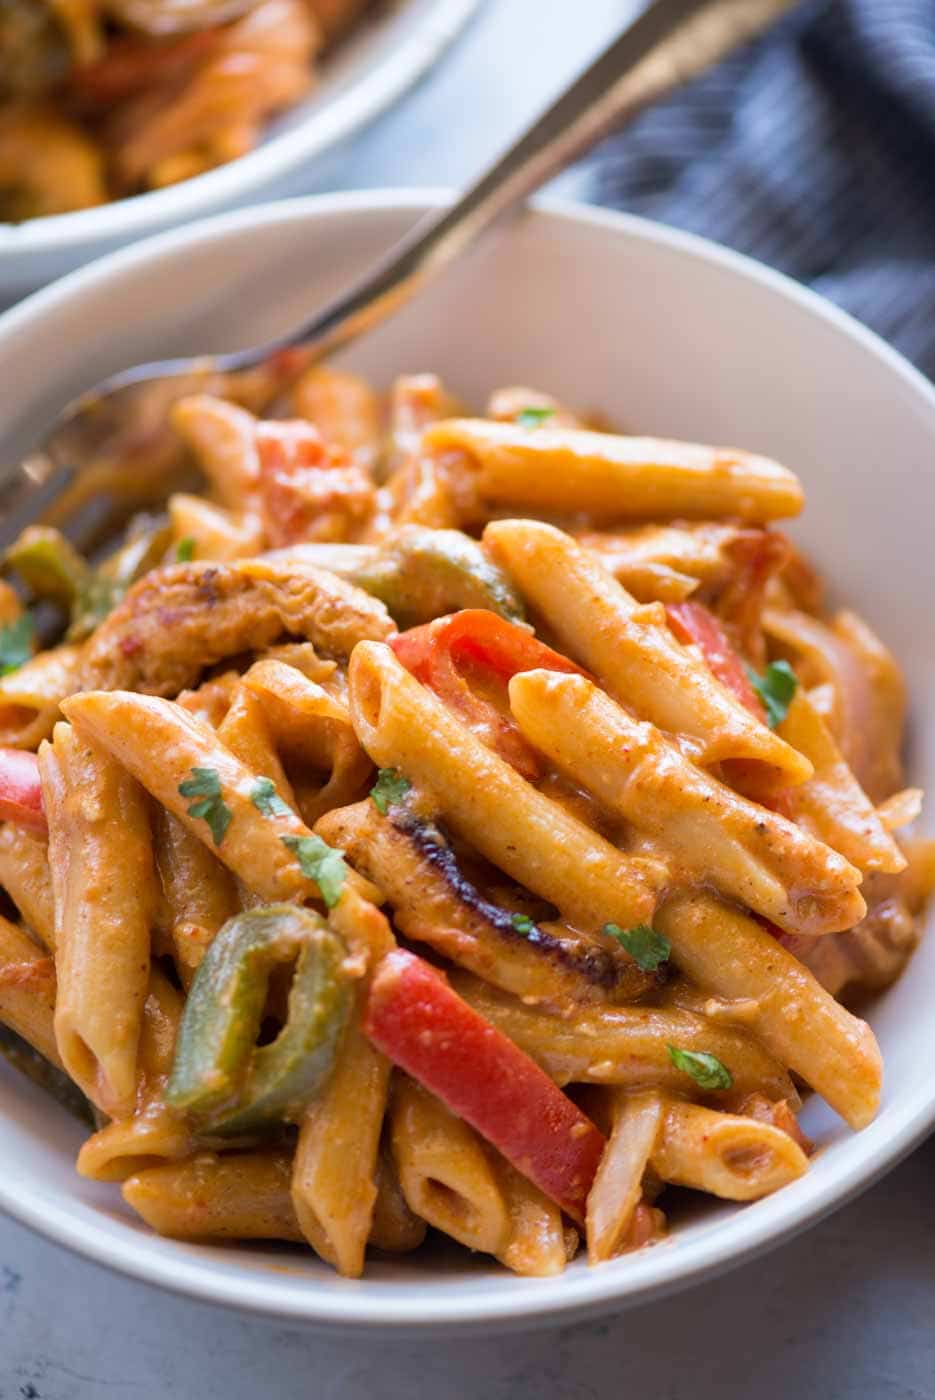 Chicken Fajita Pasta is a one-pot dinner that takes 30 minutes to make. Creamy pasta with chicken, peppers, onion and fajita seasoning, you would fall in love with this easy pasta recipe.